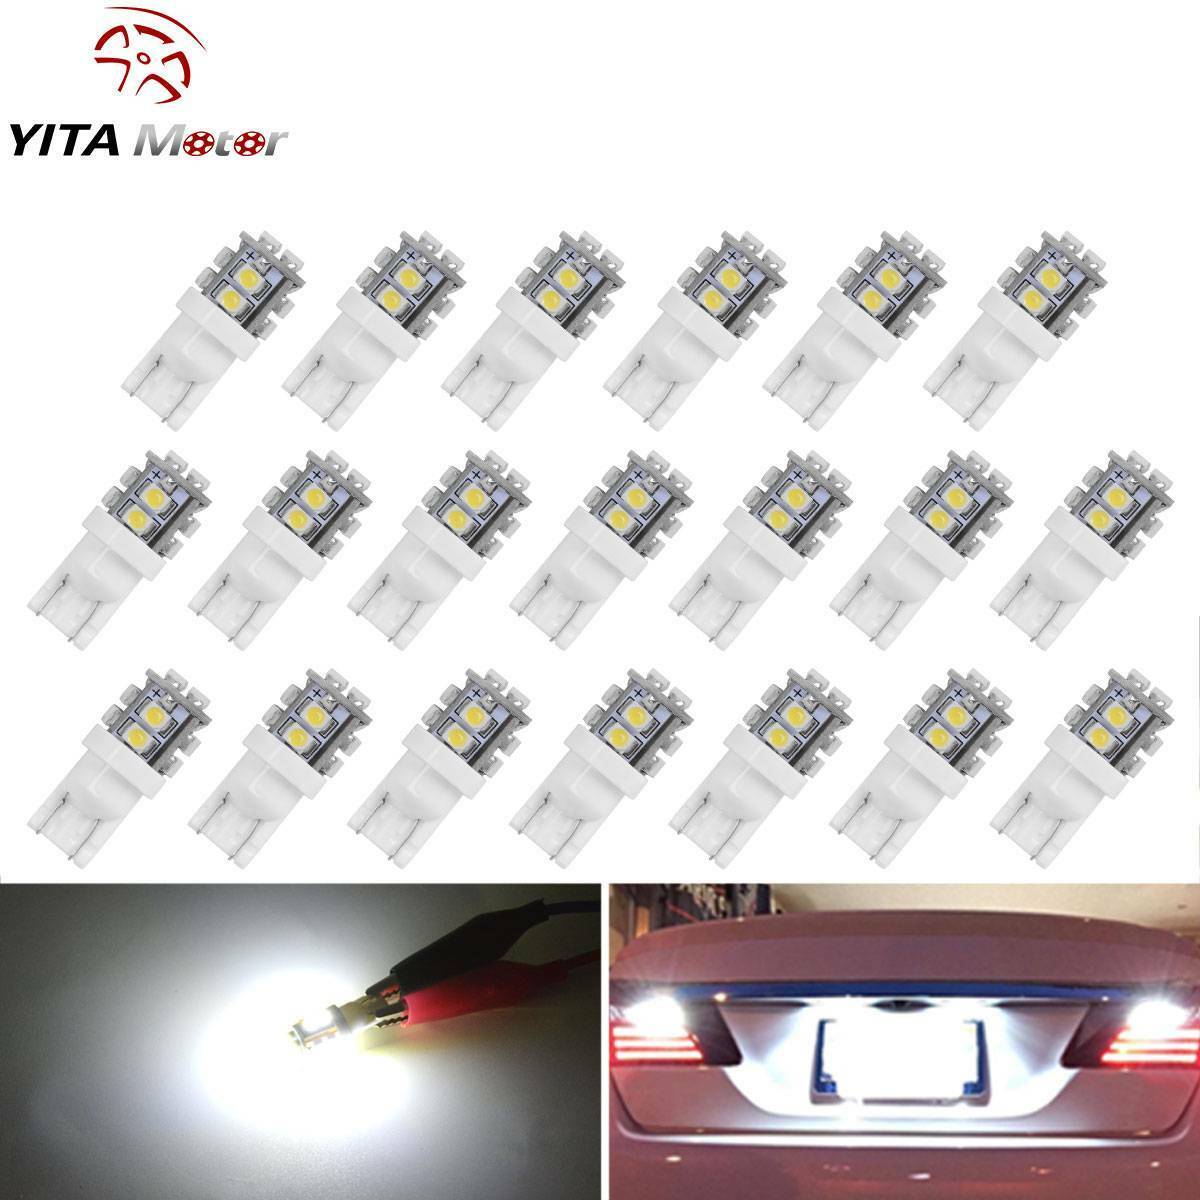 YITAMOTOR 20PCS White T10 168 Wedge LED Dome License Plate Interior Light Bulbs